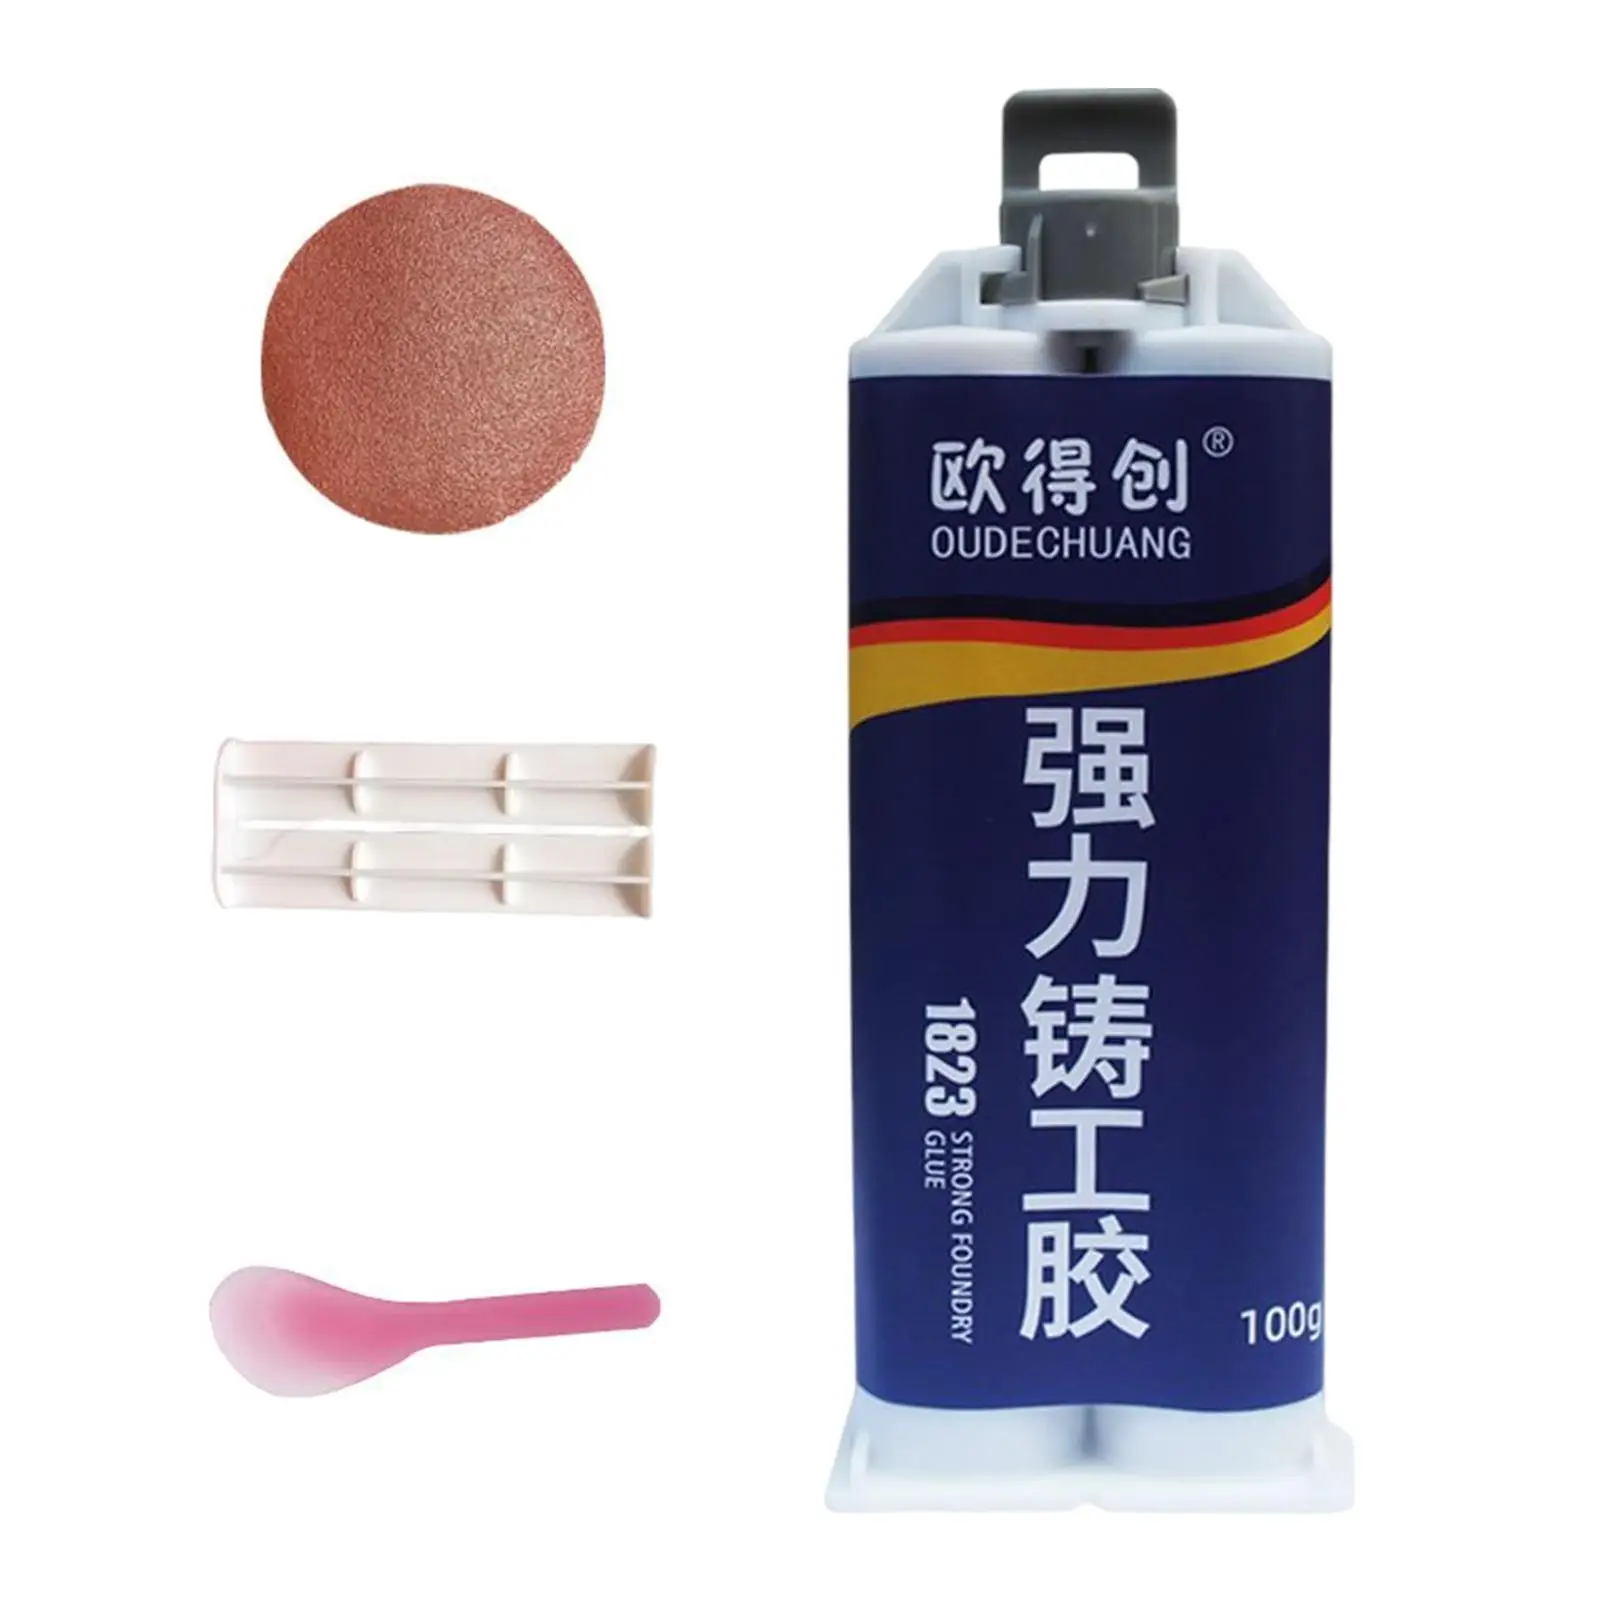 Universal Cold Weld Repair Adhesive Bonding Epoxy Casting Agent Tool 100G Metal Repair Paste for Cast Iron Cold Weld